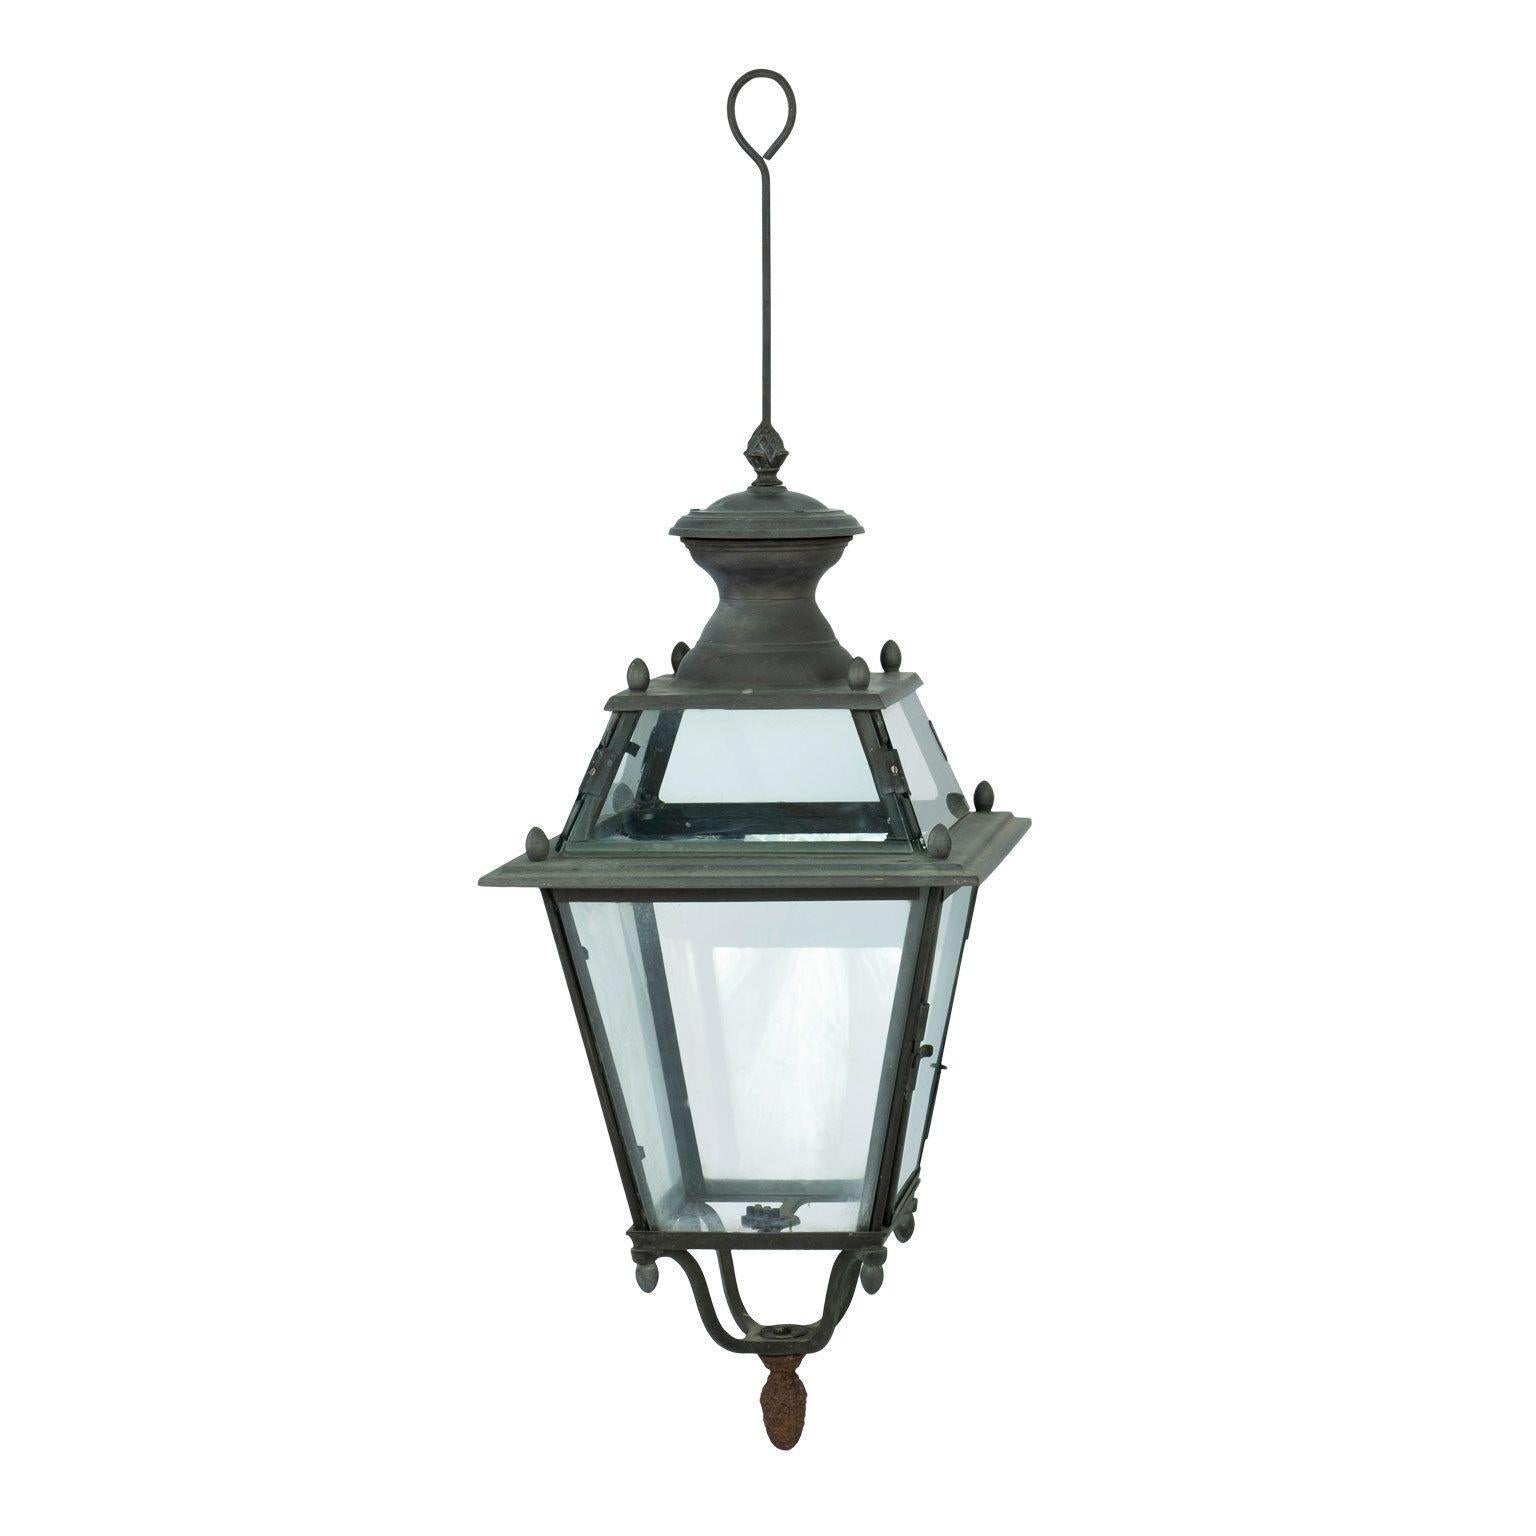 French Provincial French Iron and Tole Glass-Paneled Lantern For Sale